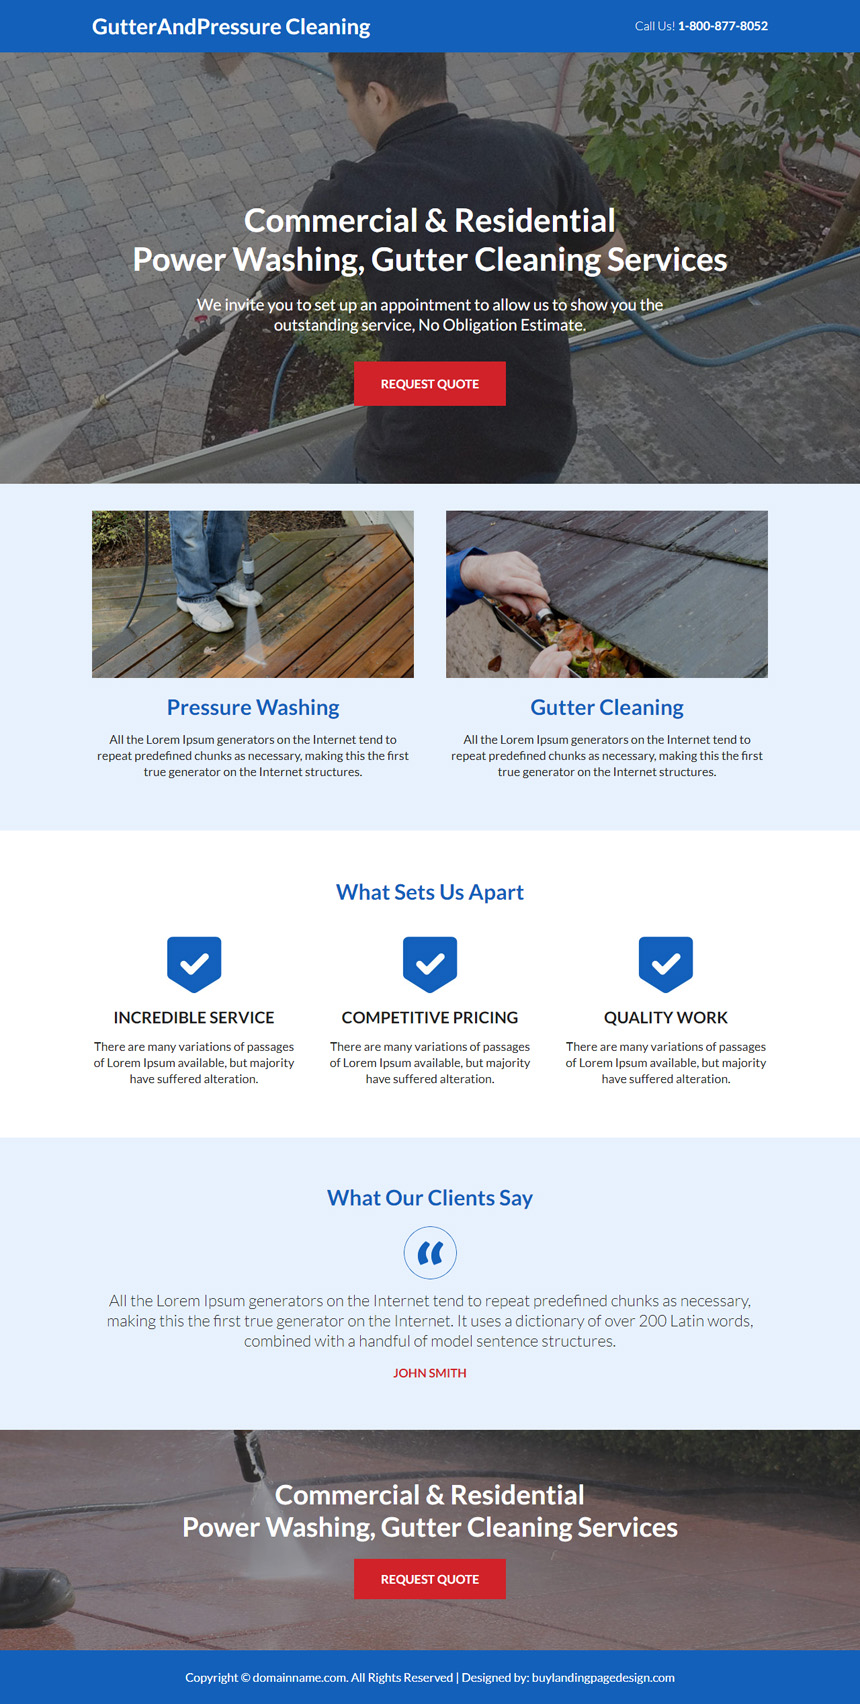 gutter and pressure cleaning responsive landing page